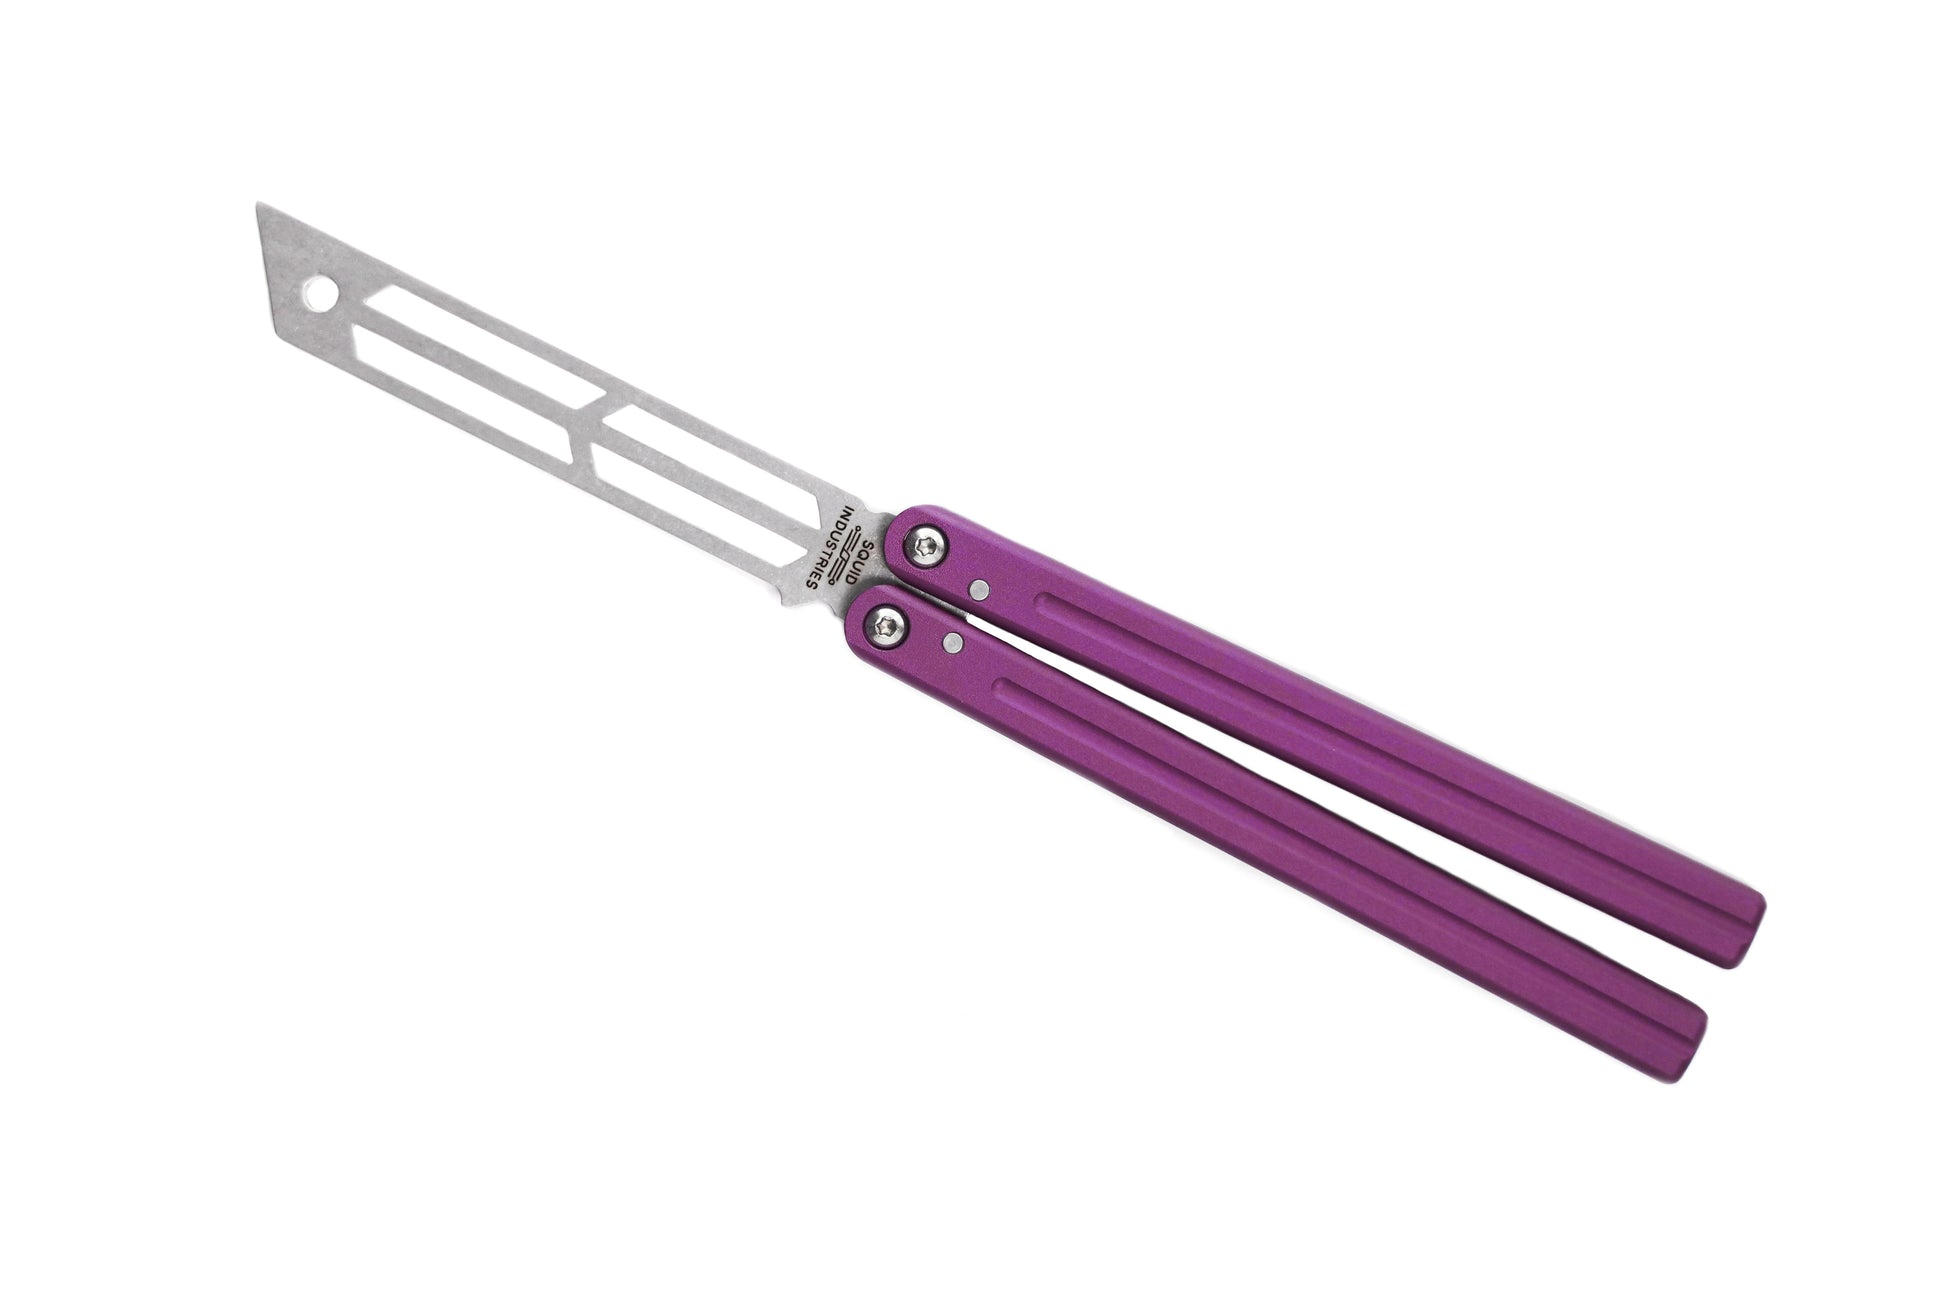 Purple Triton V2 Clearance Blemished Balisong Butterfly Knife Trainer